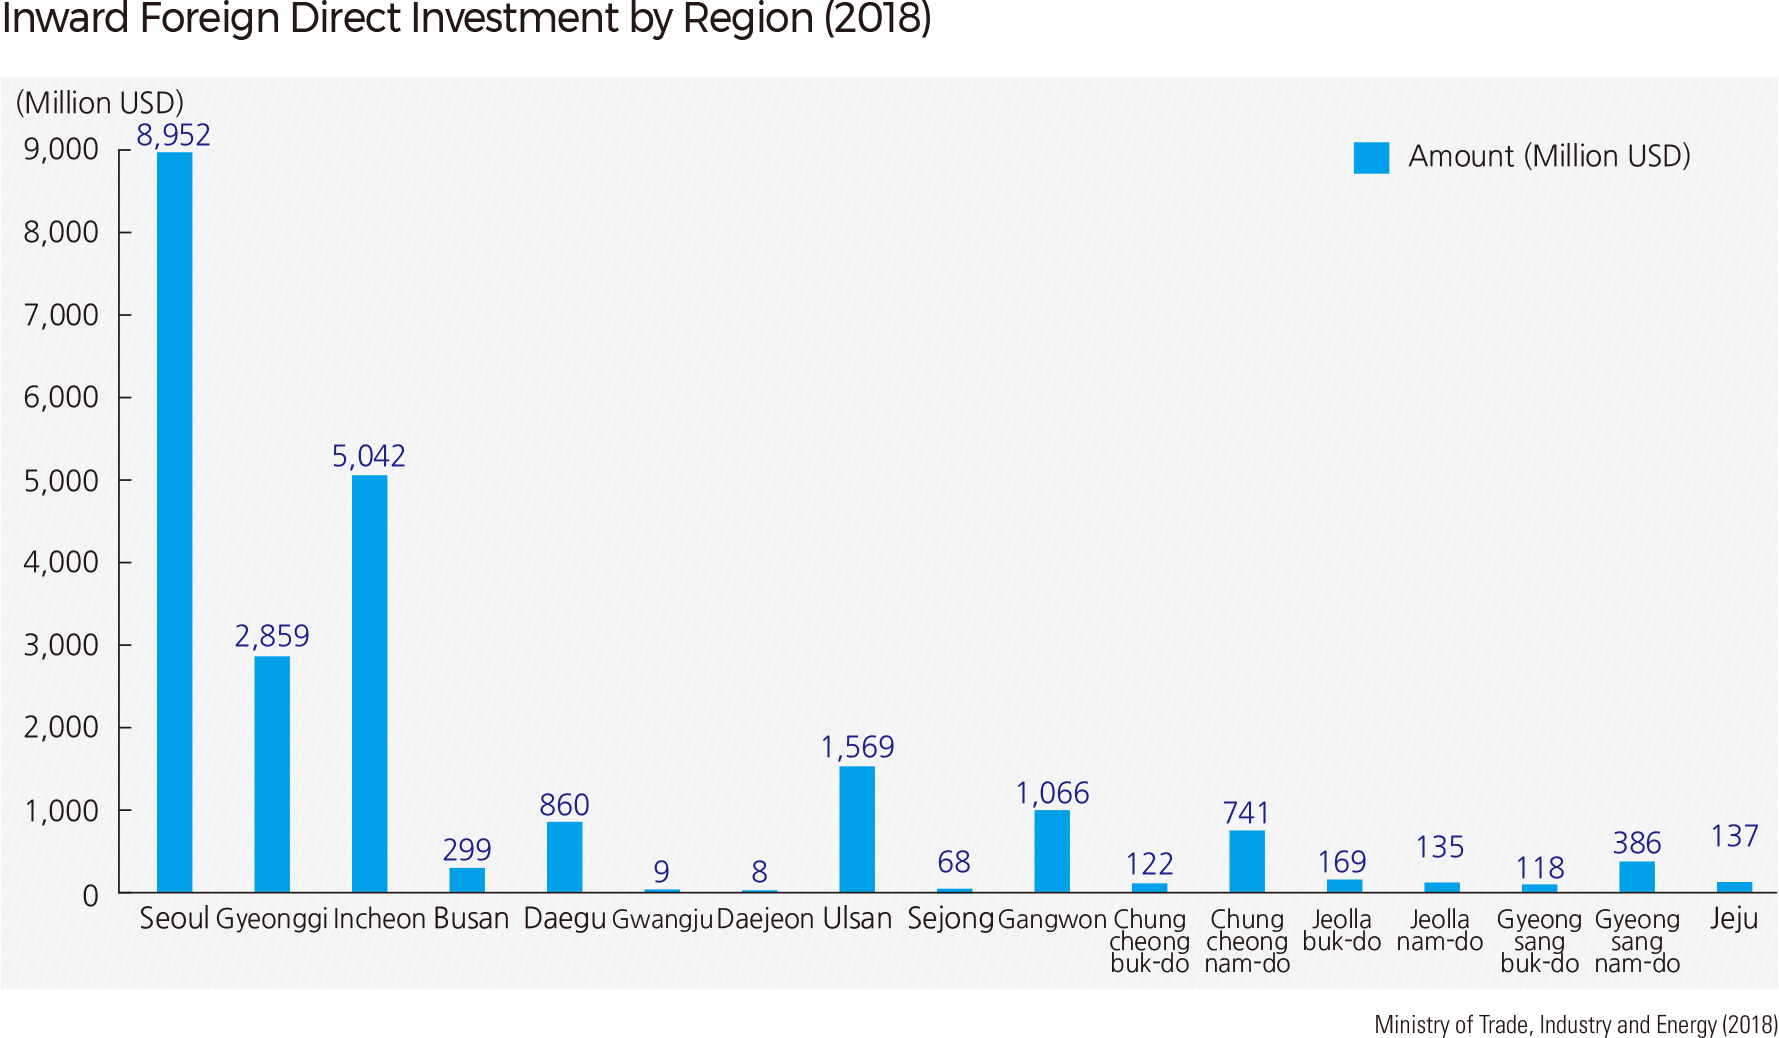 Inward Foreign Direct Investment by Region (2018)